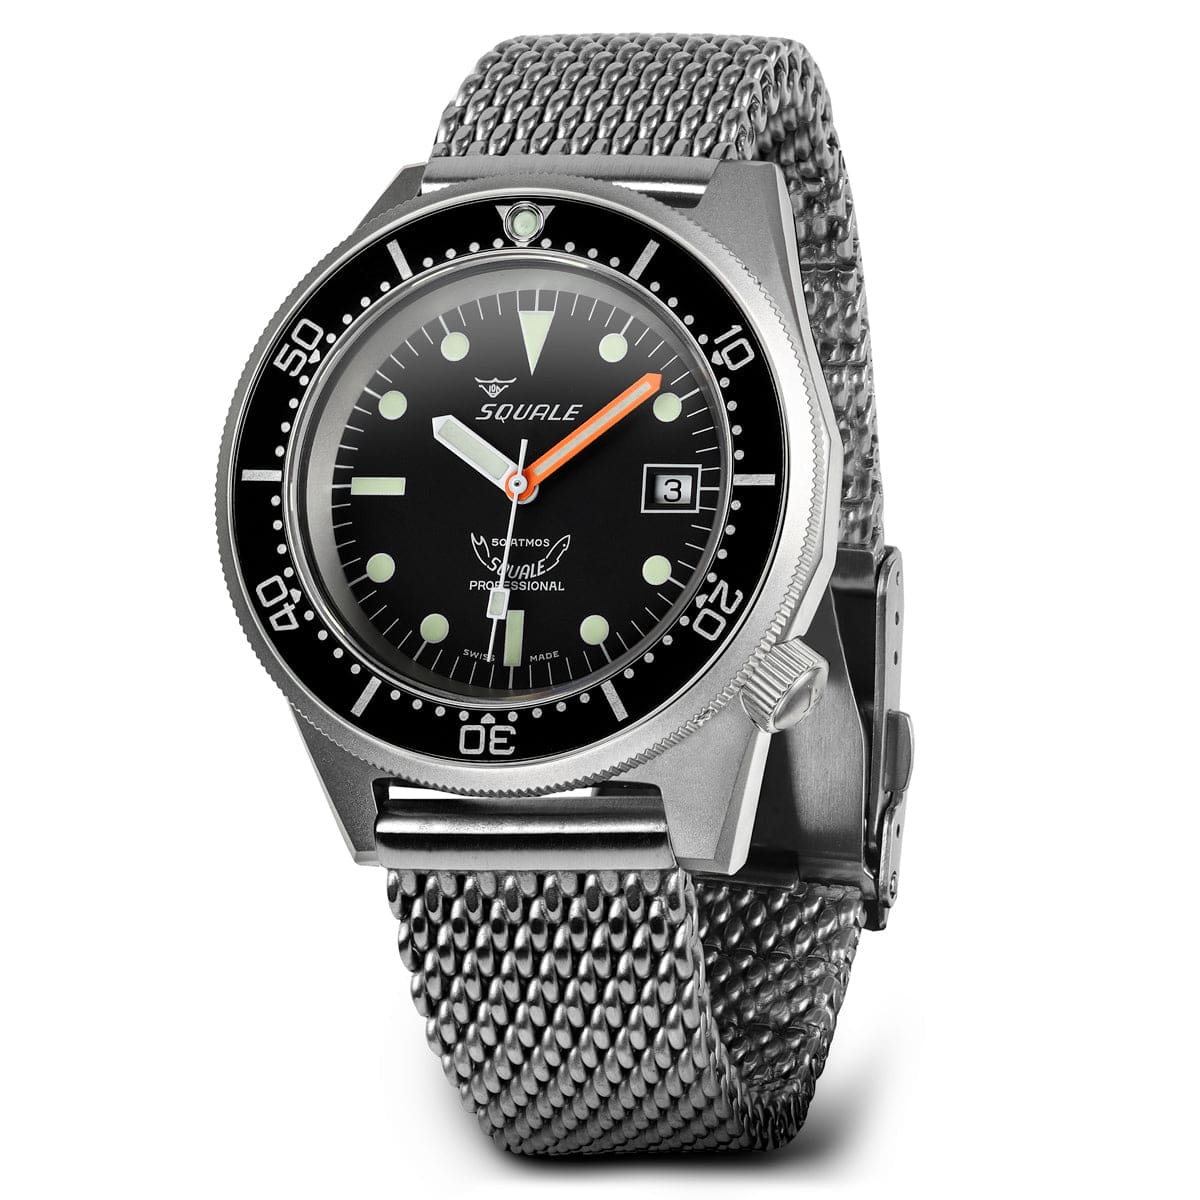 Squale 1521 Swiss Made Diver's Watch - Black With Blasted Case